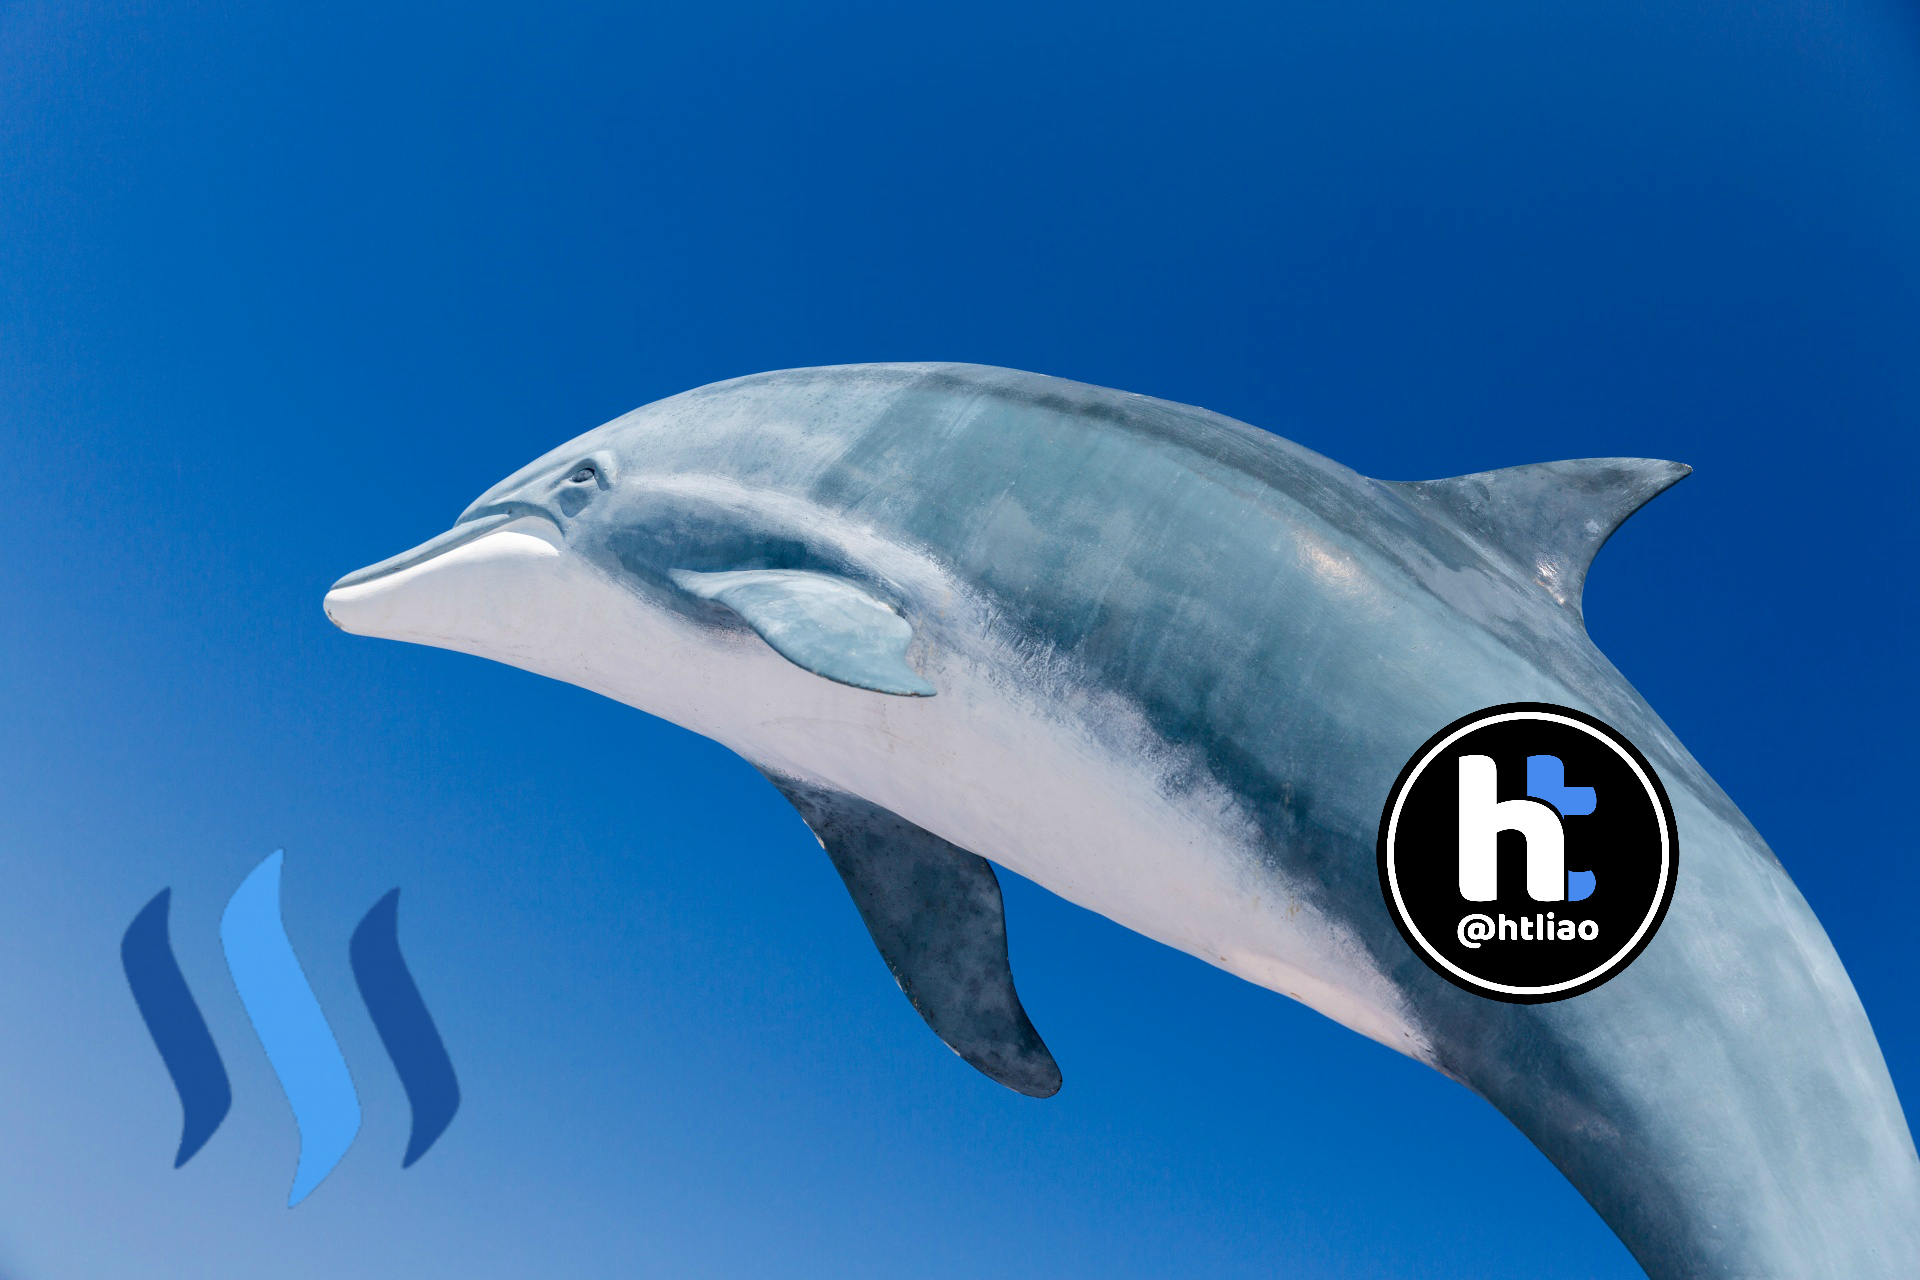 1500+ followers and officially a happy DOLPHIN now. Introduce my new logo and banner